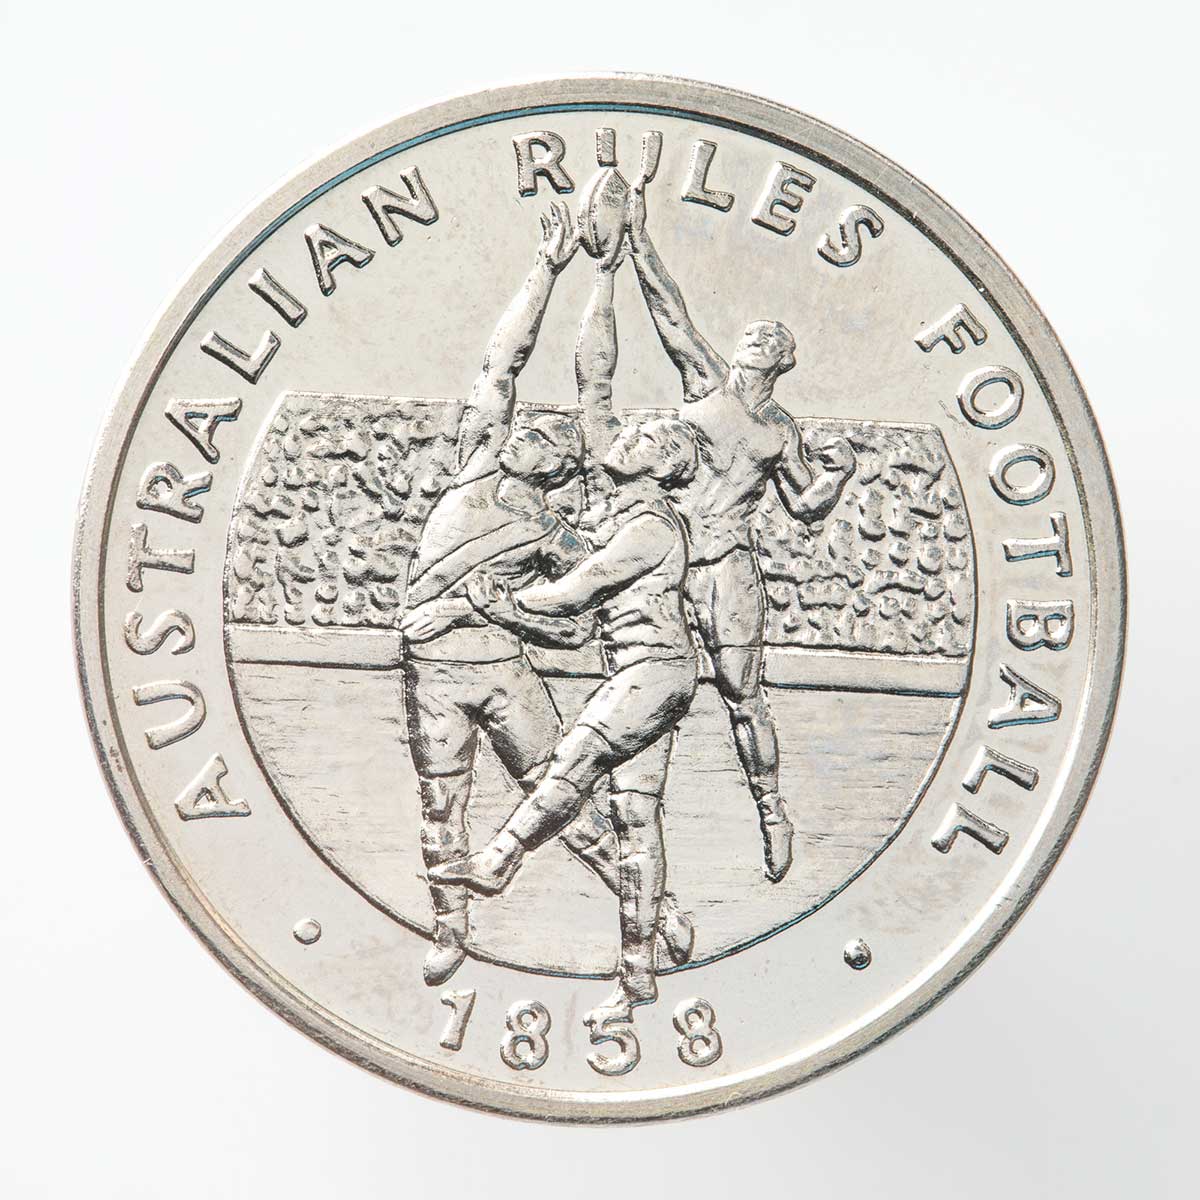 A silver coloured metal commemorative medal depicting Australian Rules Football with three footballers playing in front of a crowd with the text "Australian Rules Football" and the date "1858".